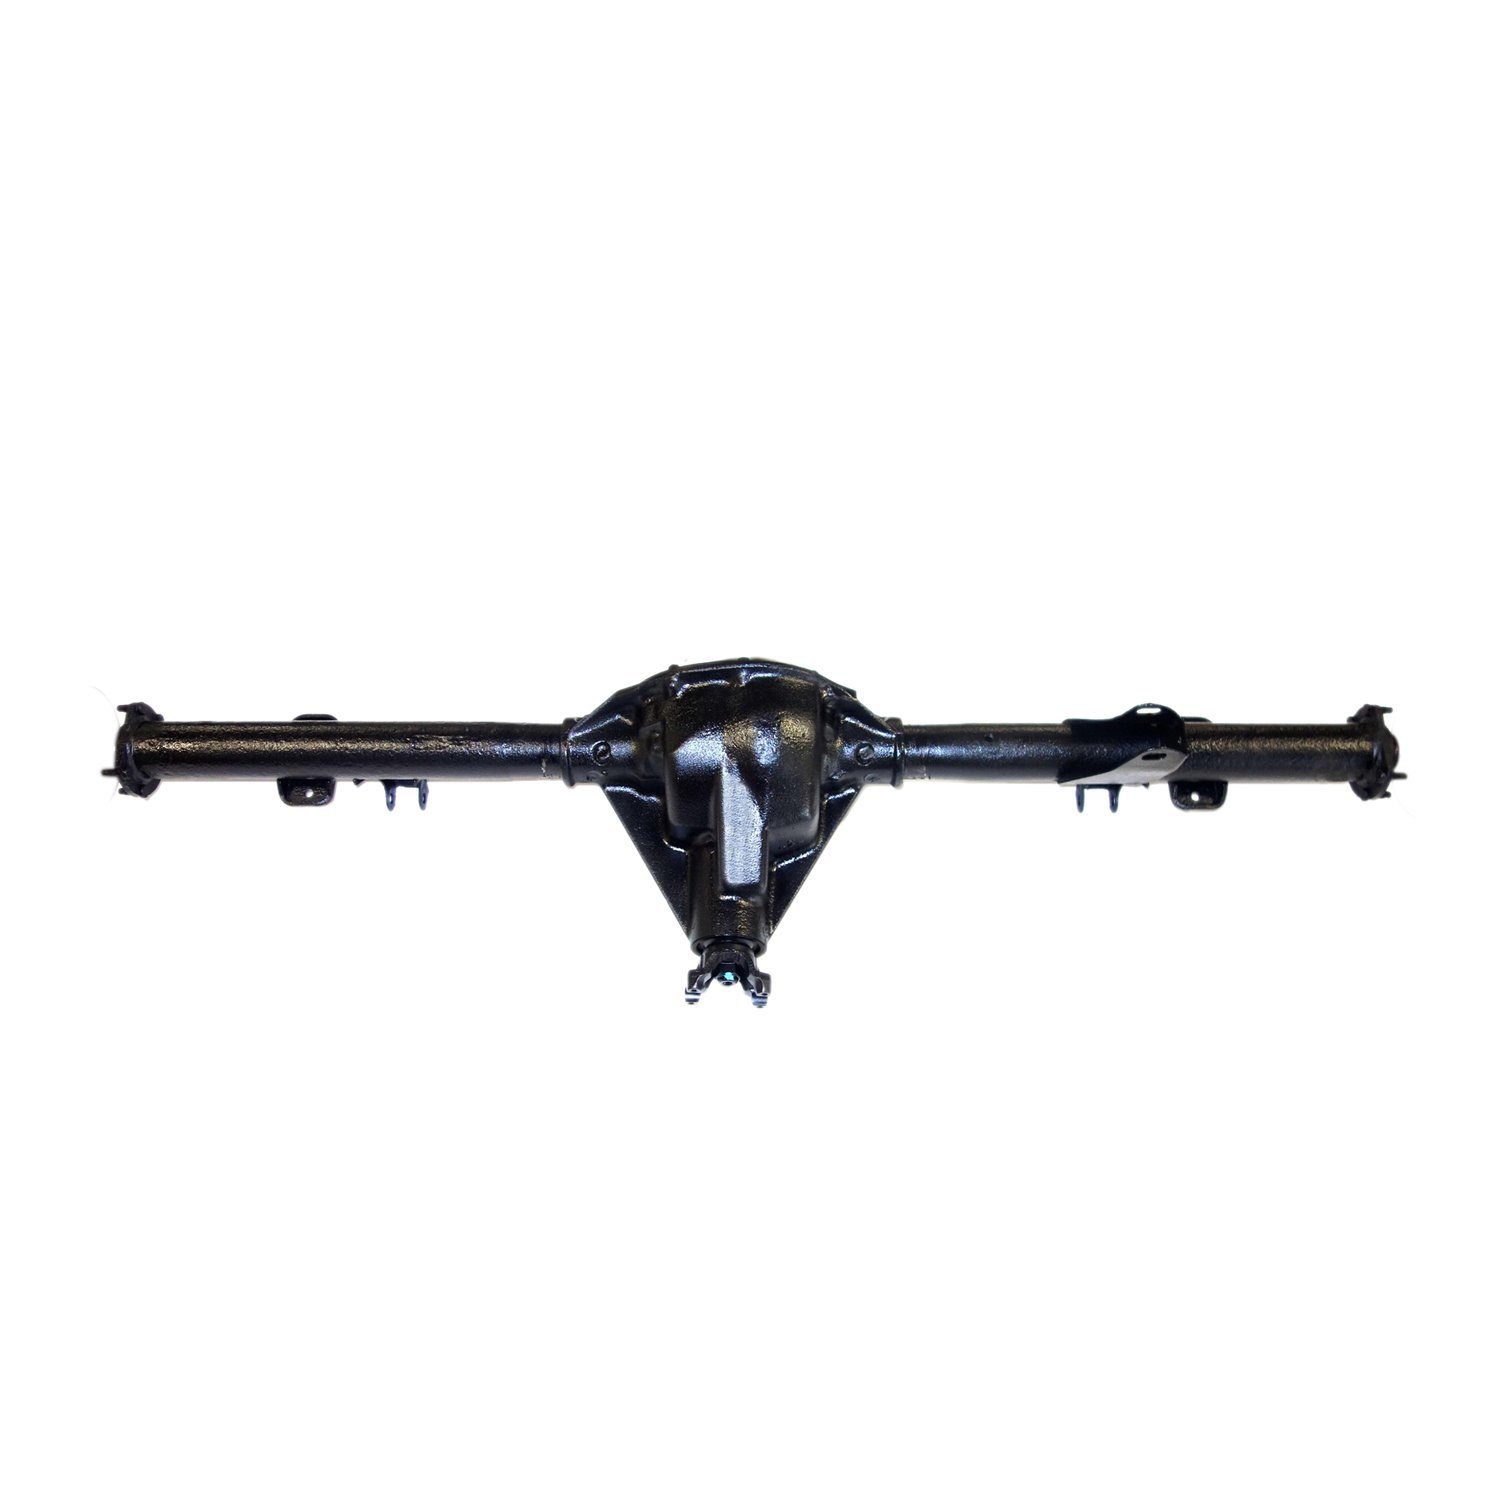 Remanufactured Complete Axle Assy for Dana 35 90-01 Cherokee, 90 Wagoneer, 3.55 with ABS